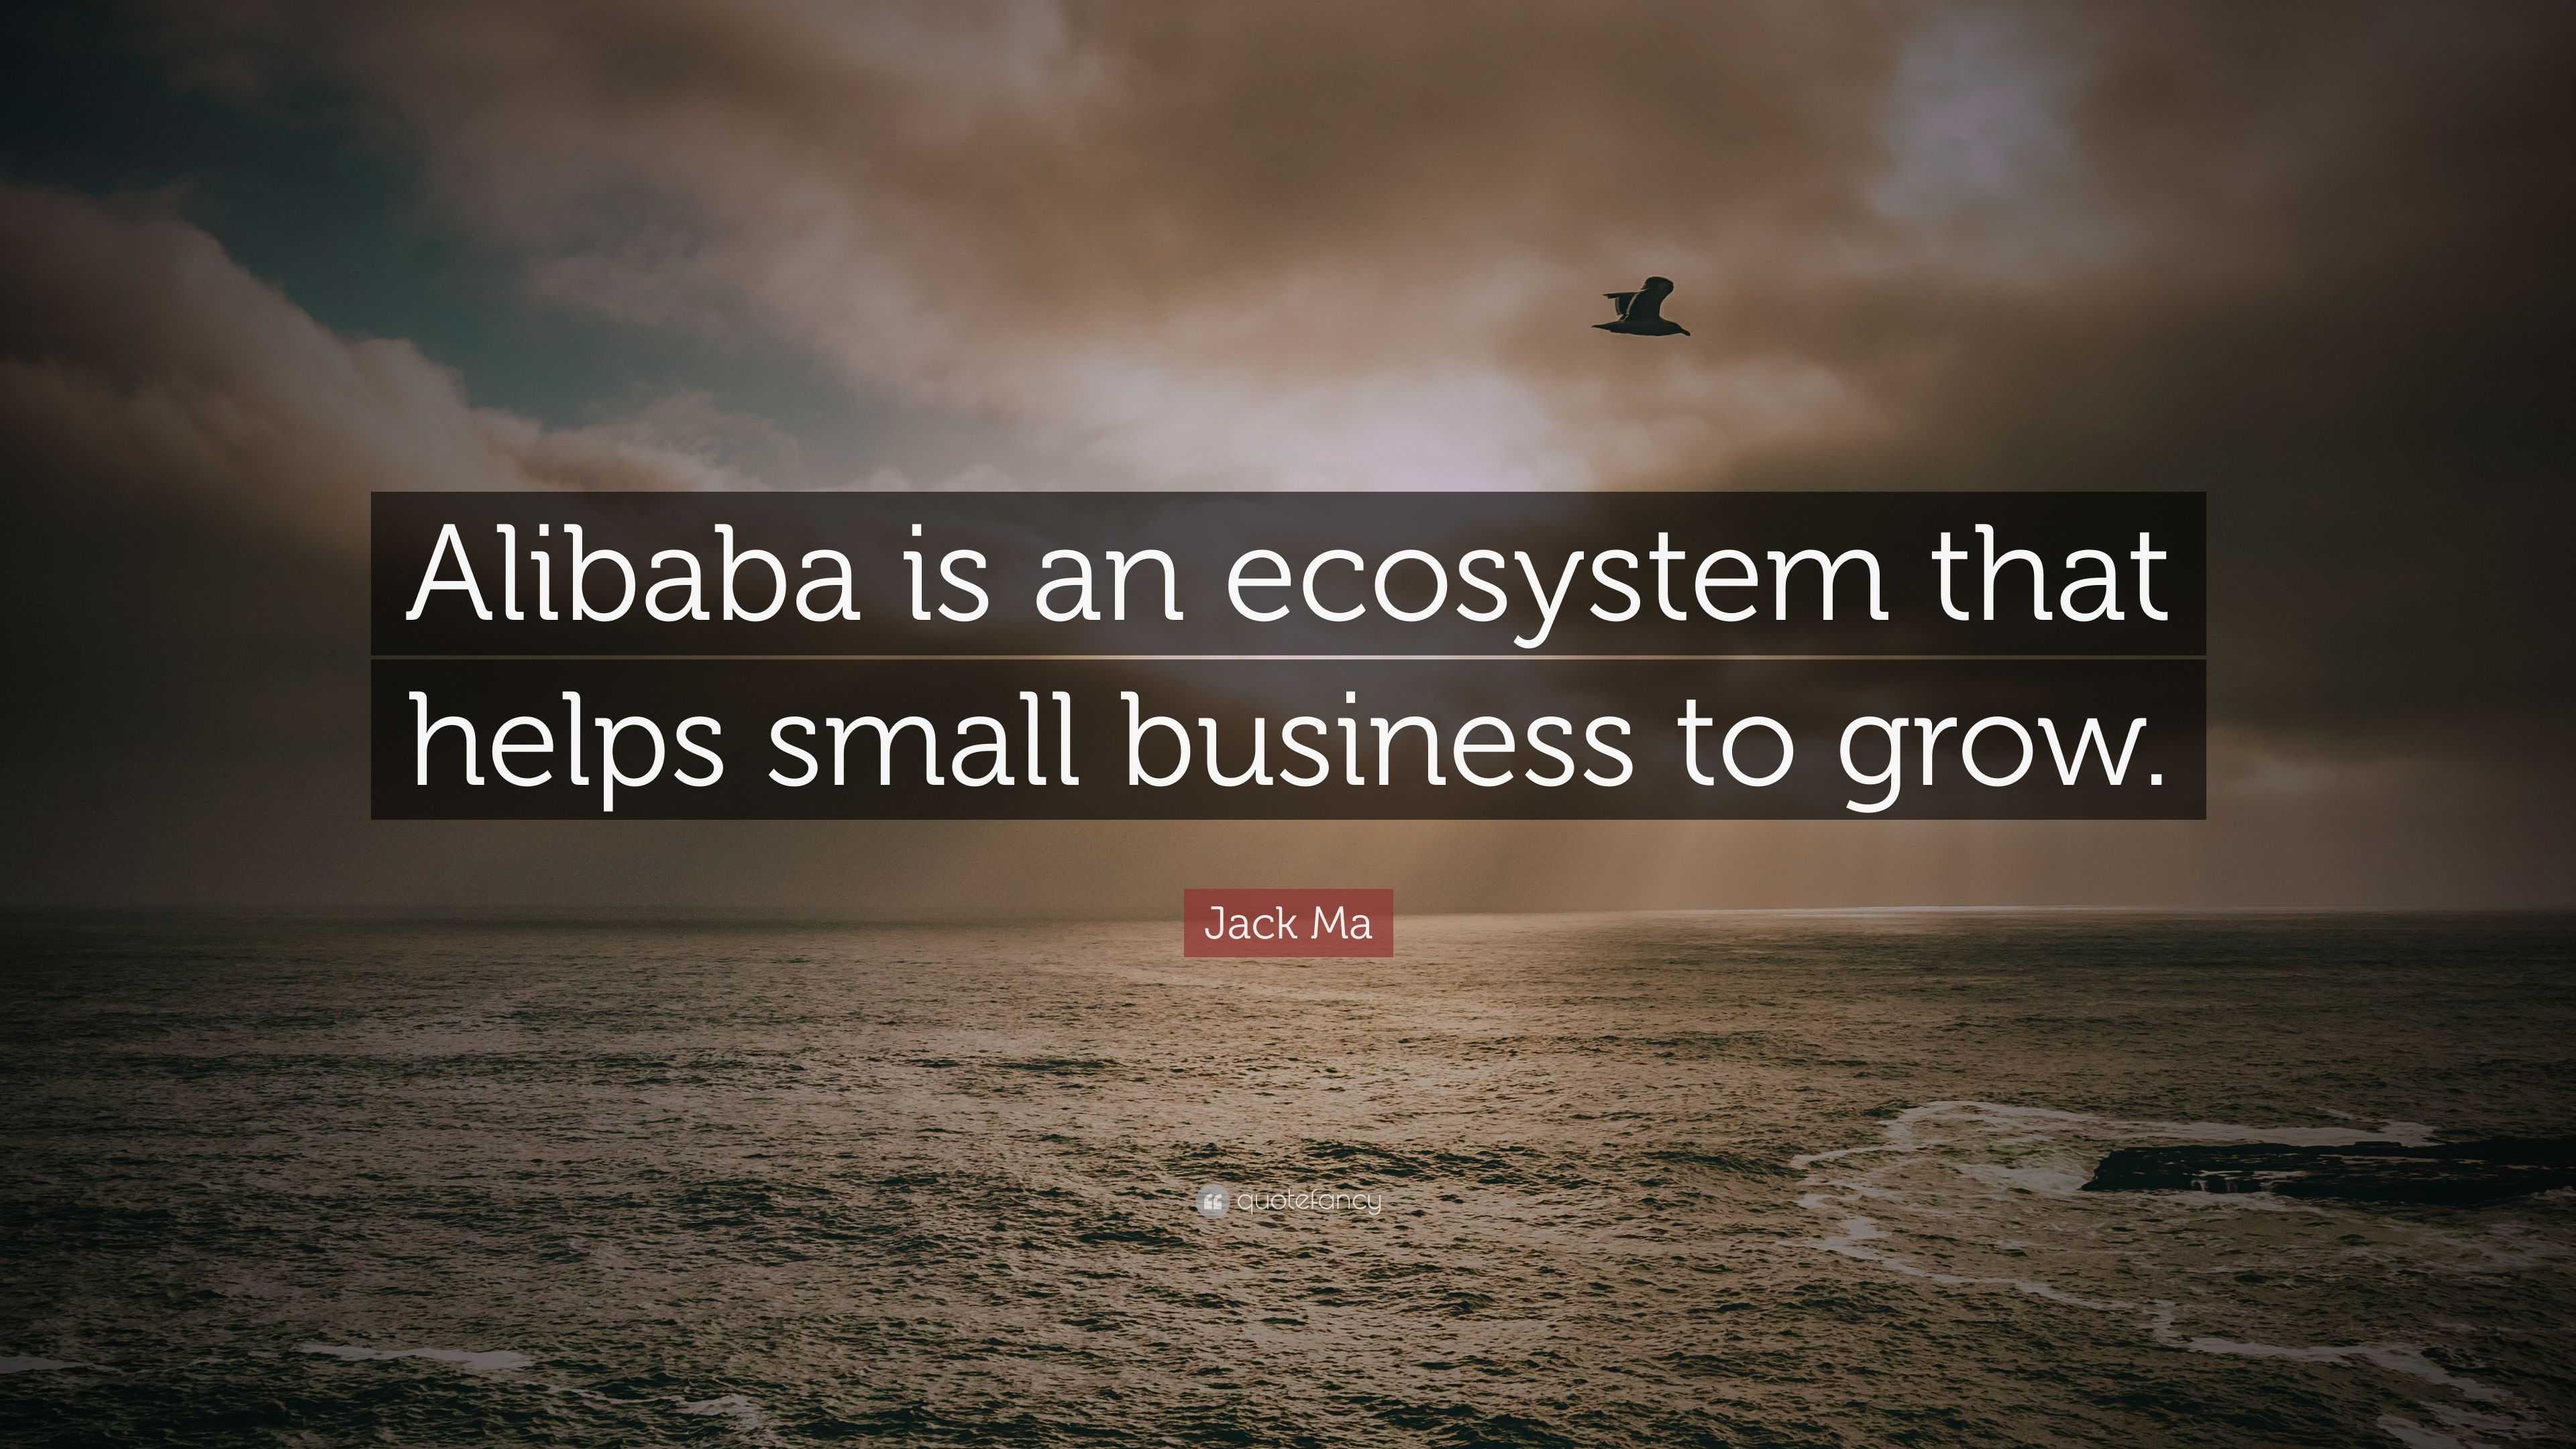 Jack Ma Quote “Alibaba is an ecosystem that helps small